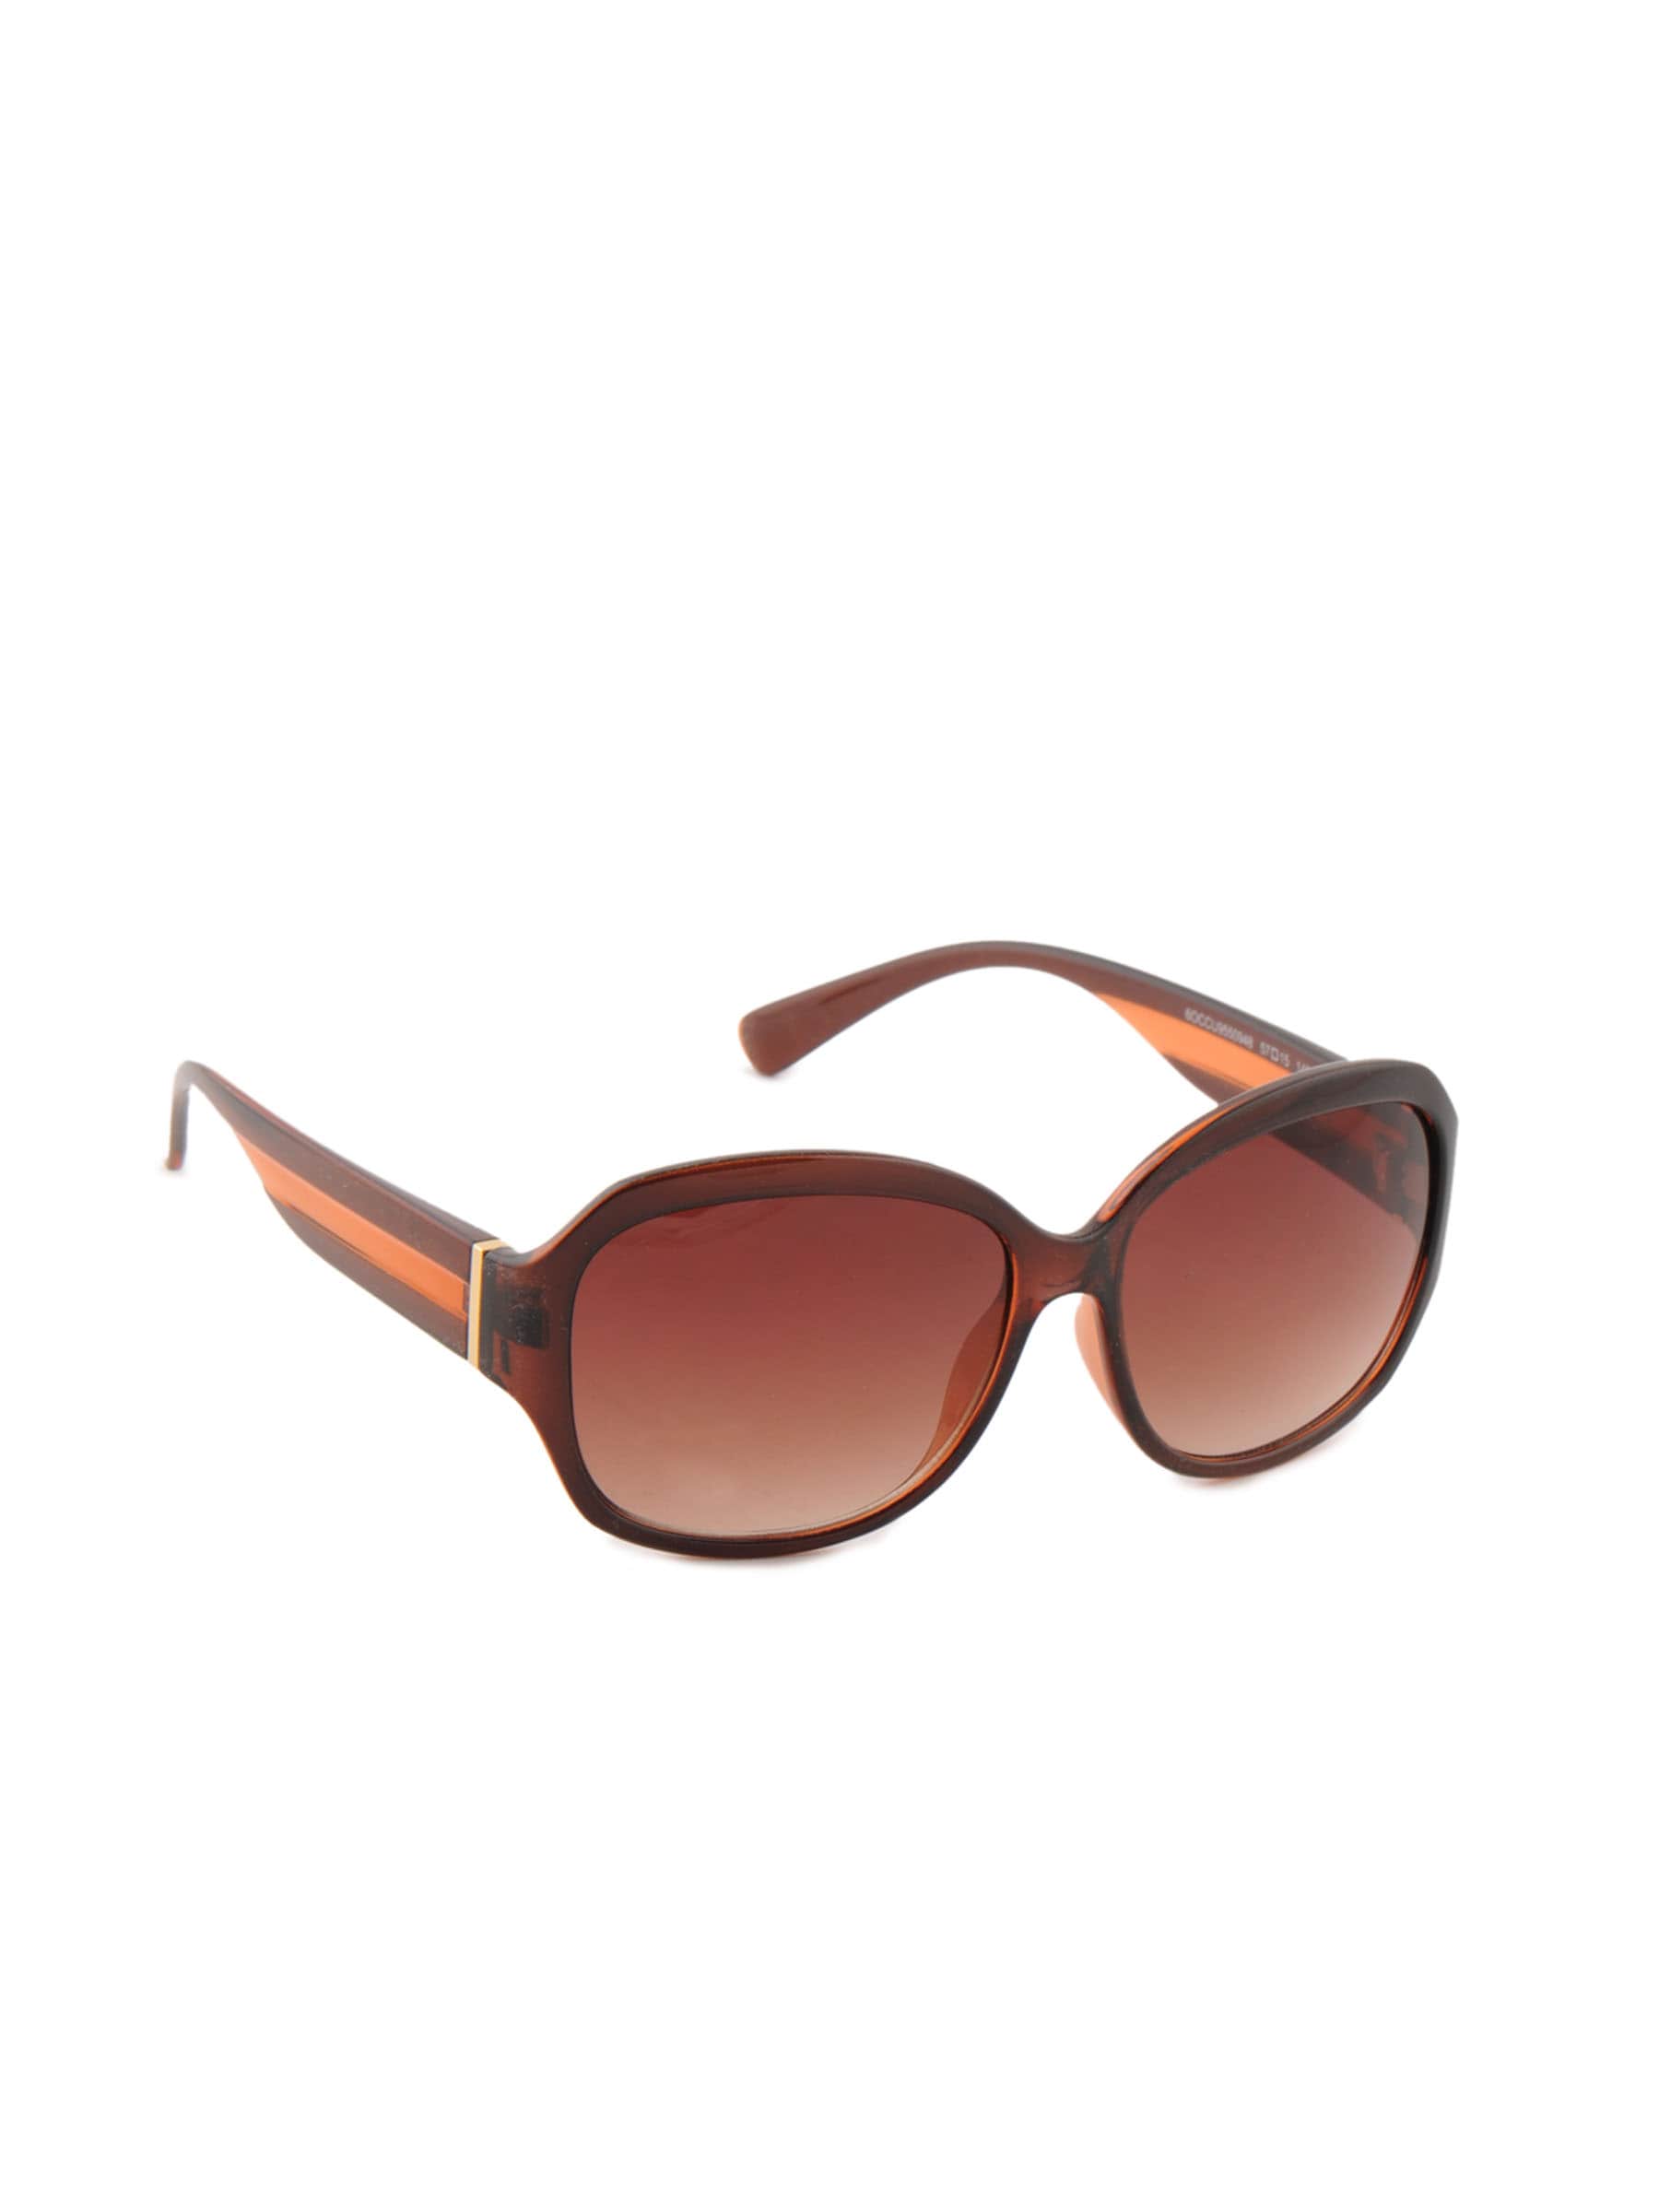 United Colors of Benetton Women Funky Brown Sunglasses